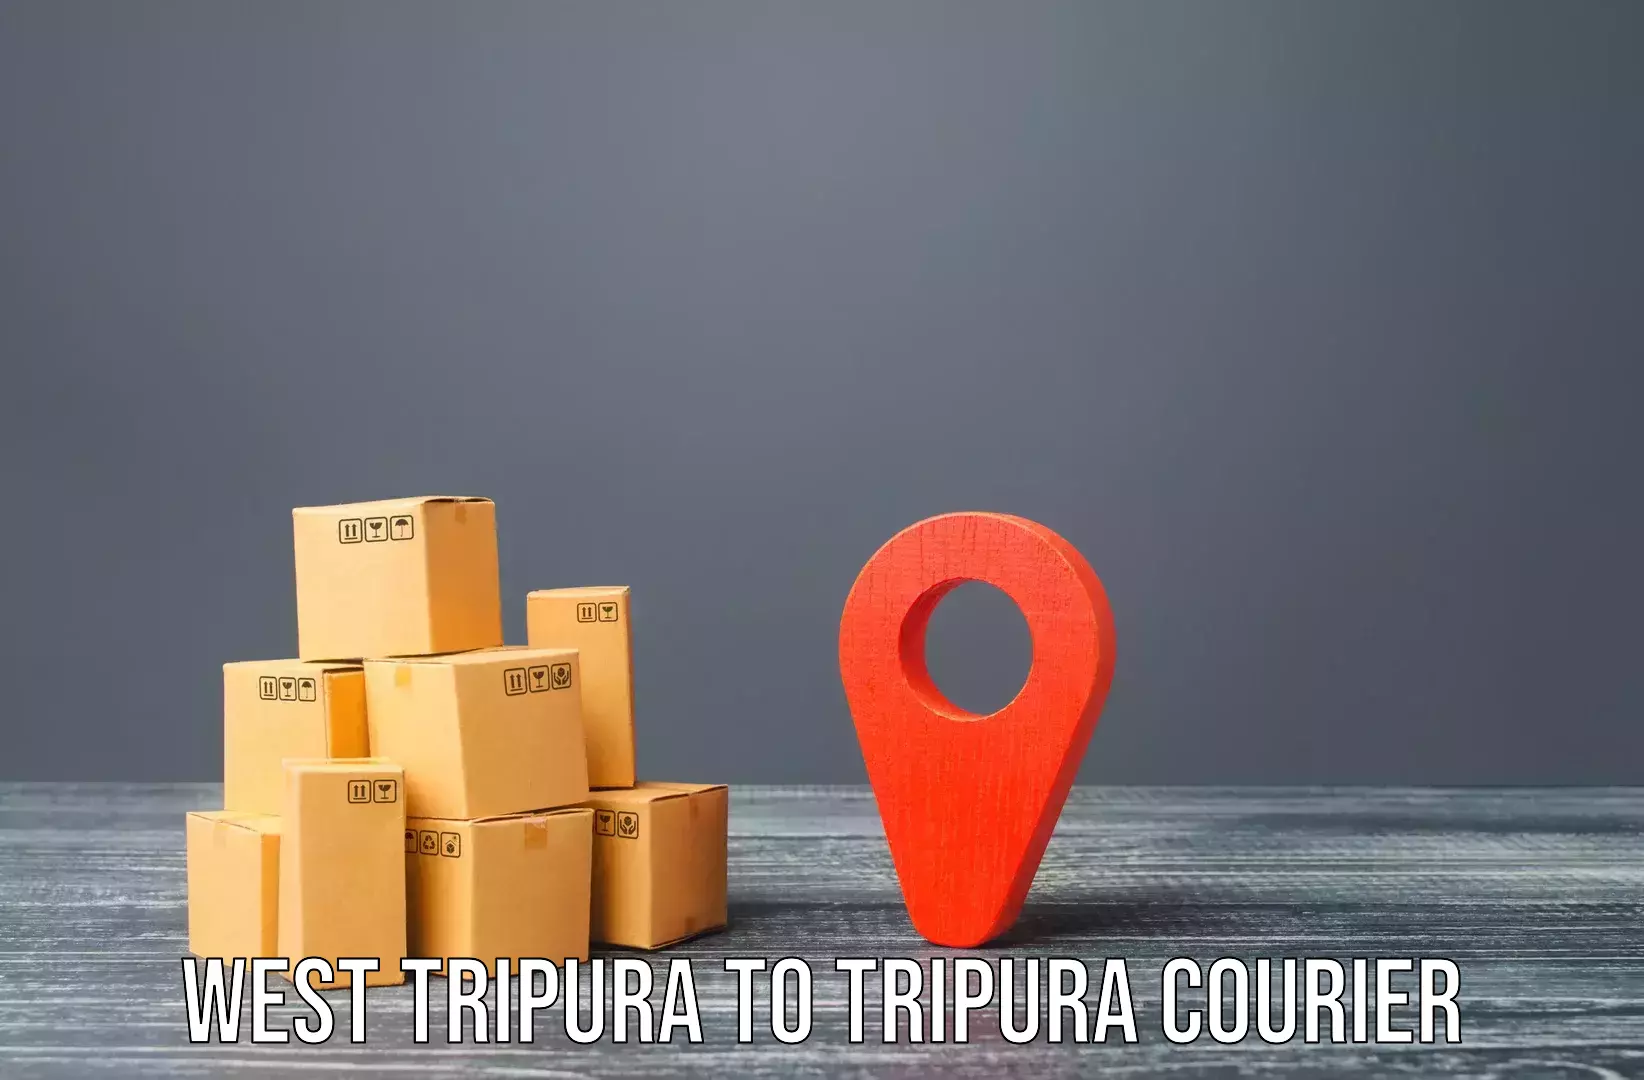 Home relocation experts in West Tripura to Tripura